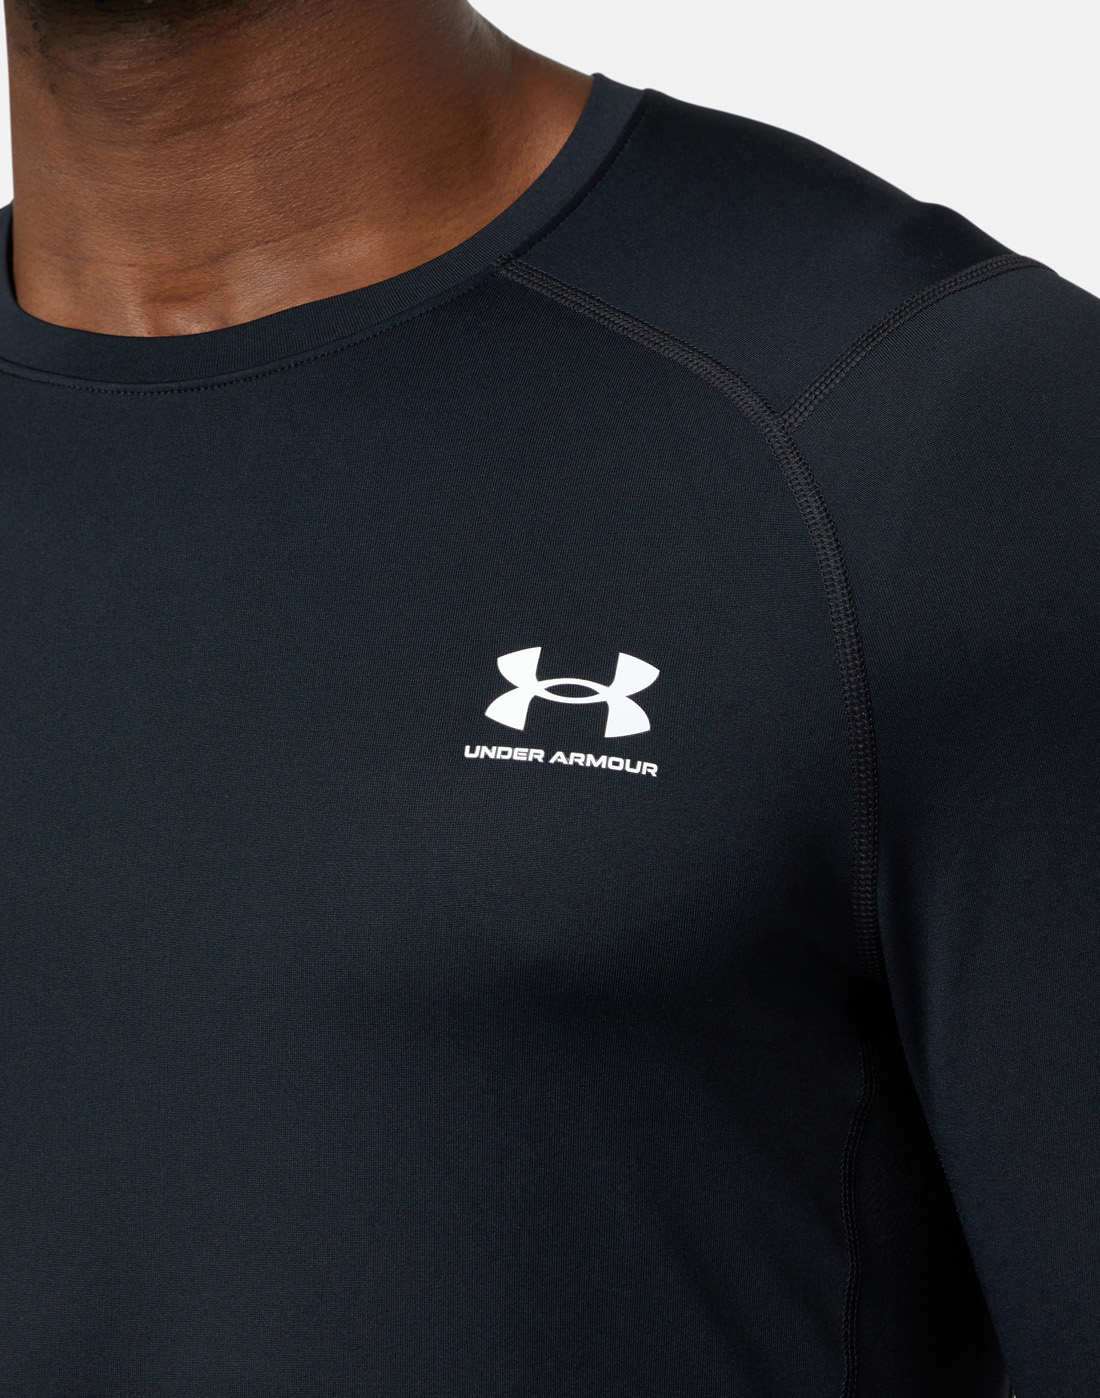 Under Armour Mens ColdGear Armour Fitted Crew Top - Black | Life Style ...